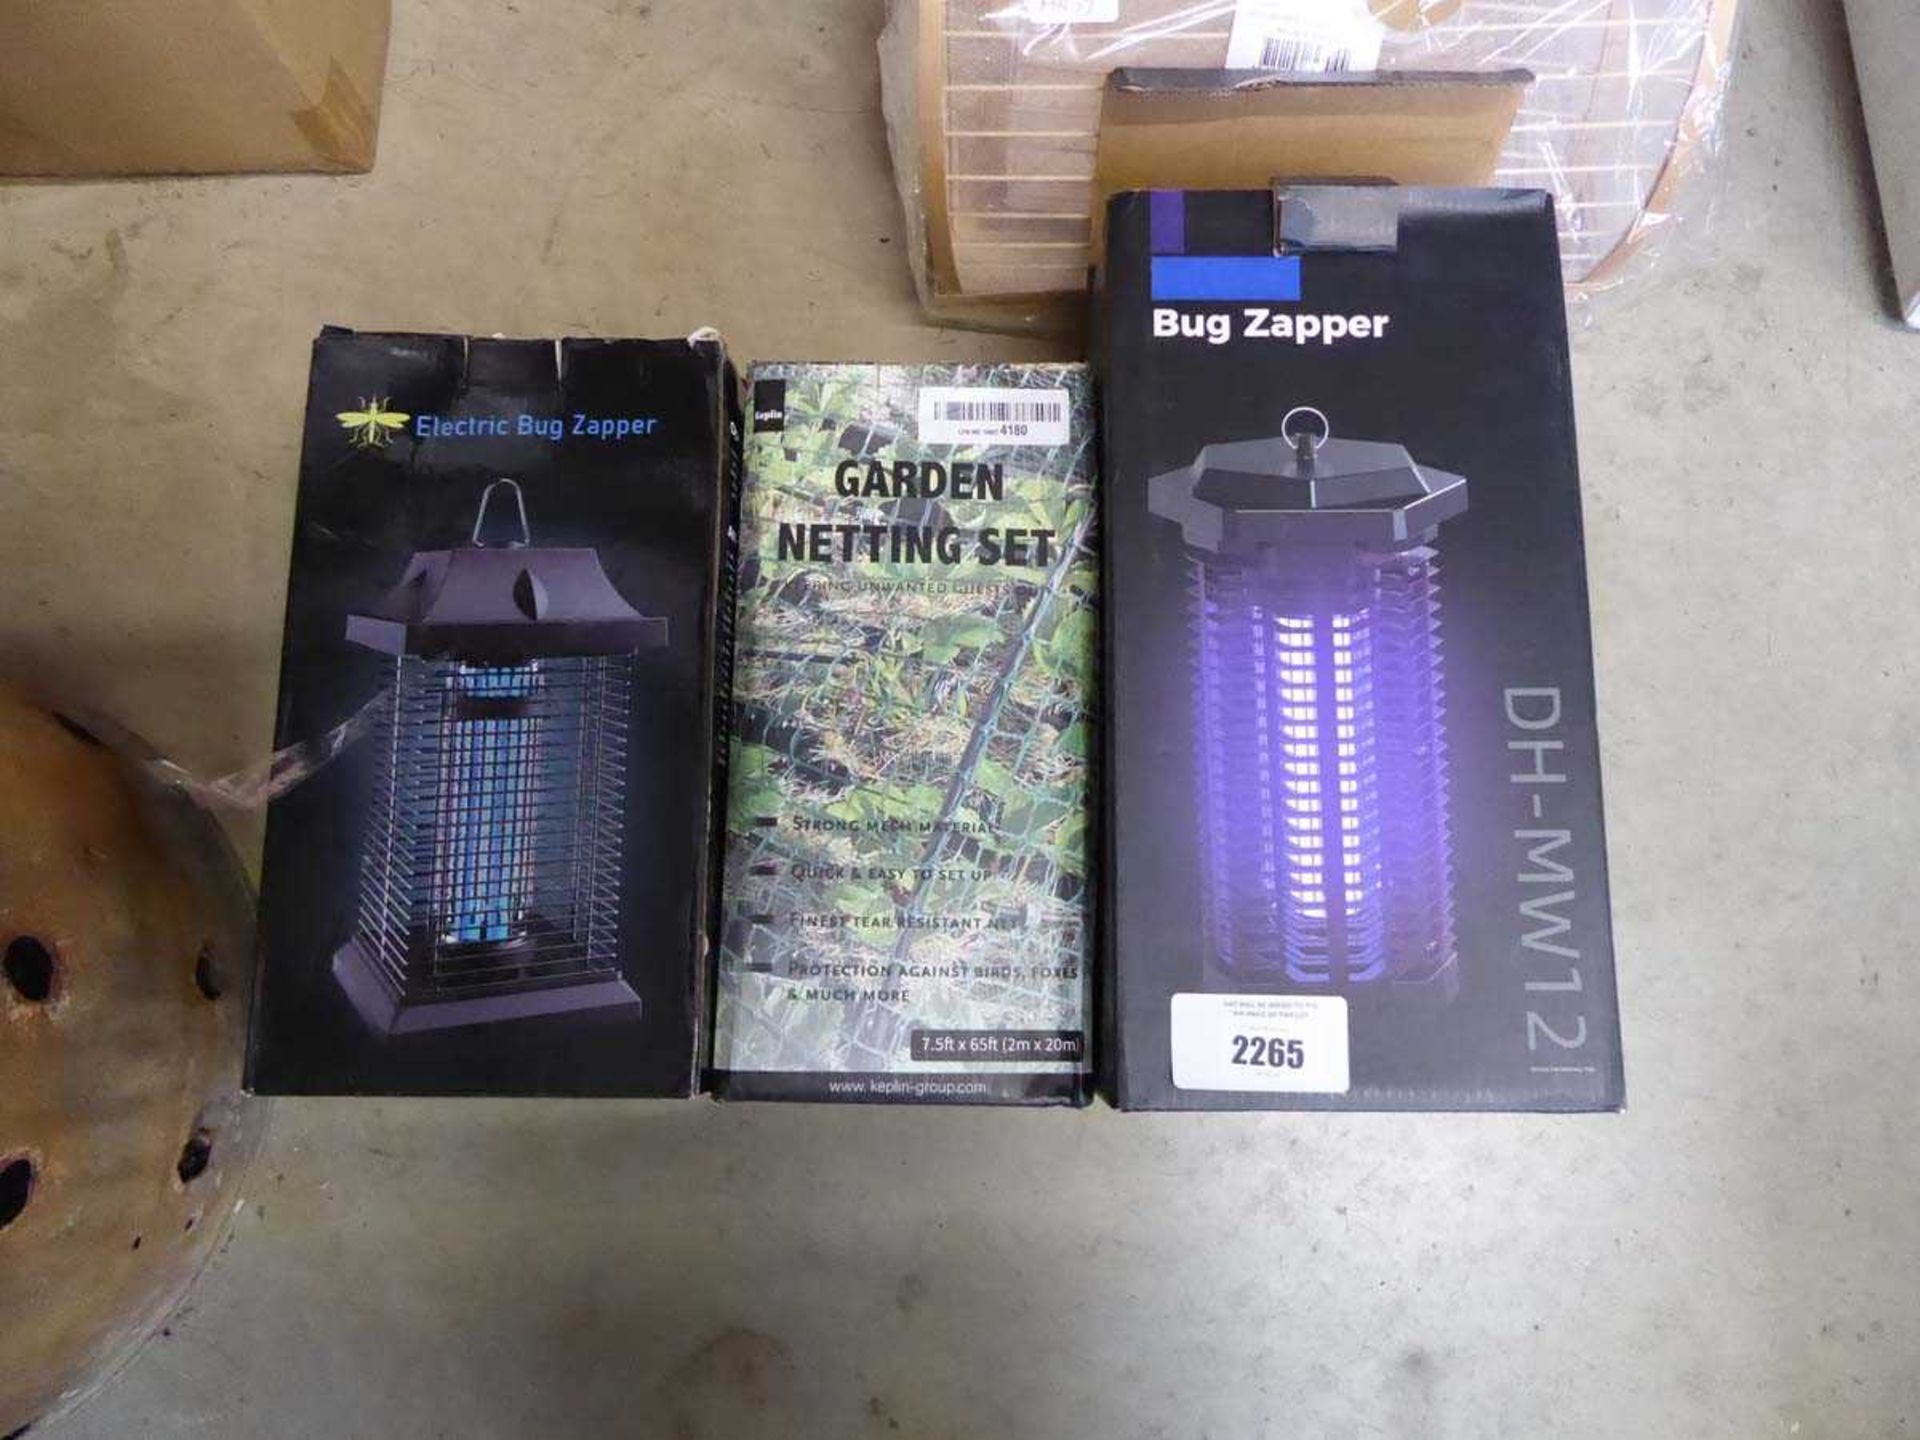 +VAT 2 electric bug zappers, together with a garden netting set